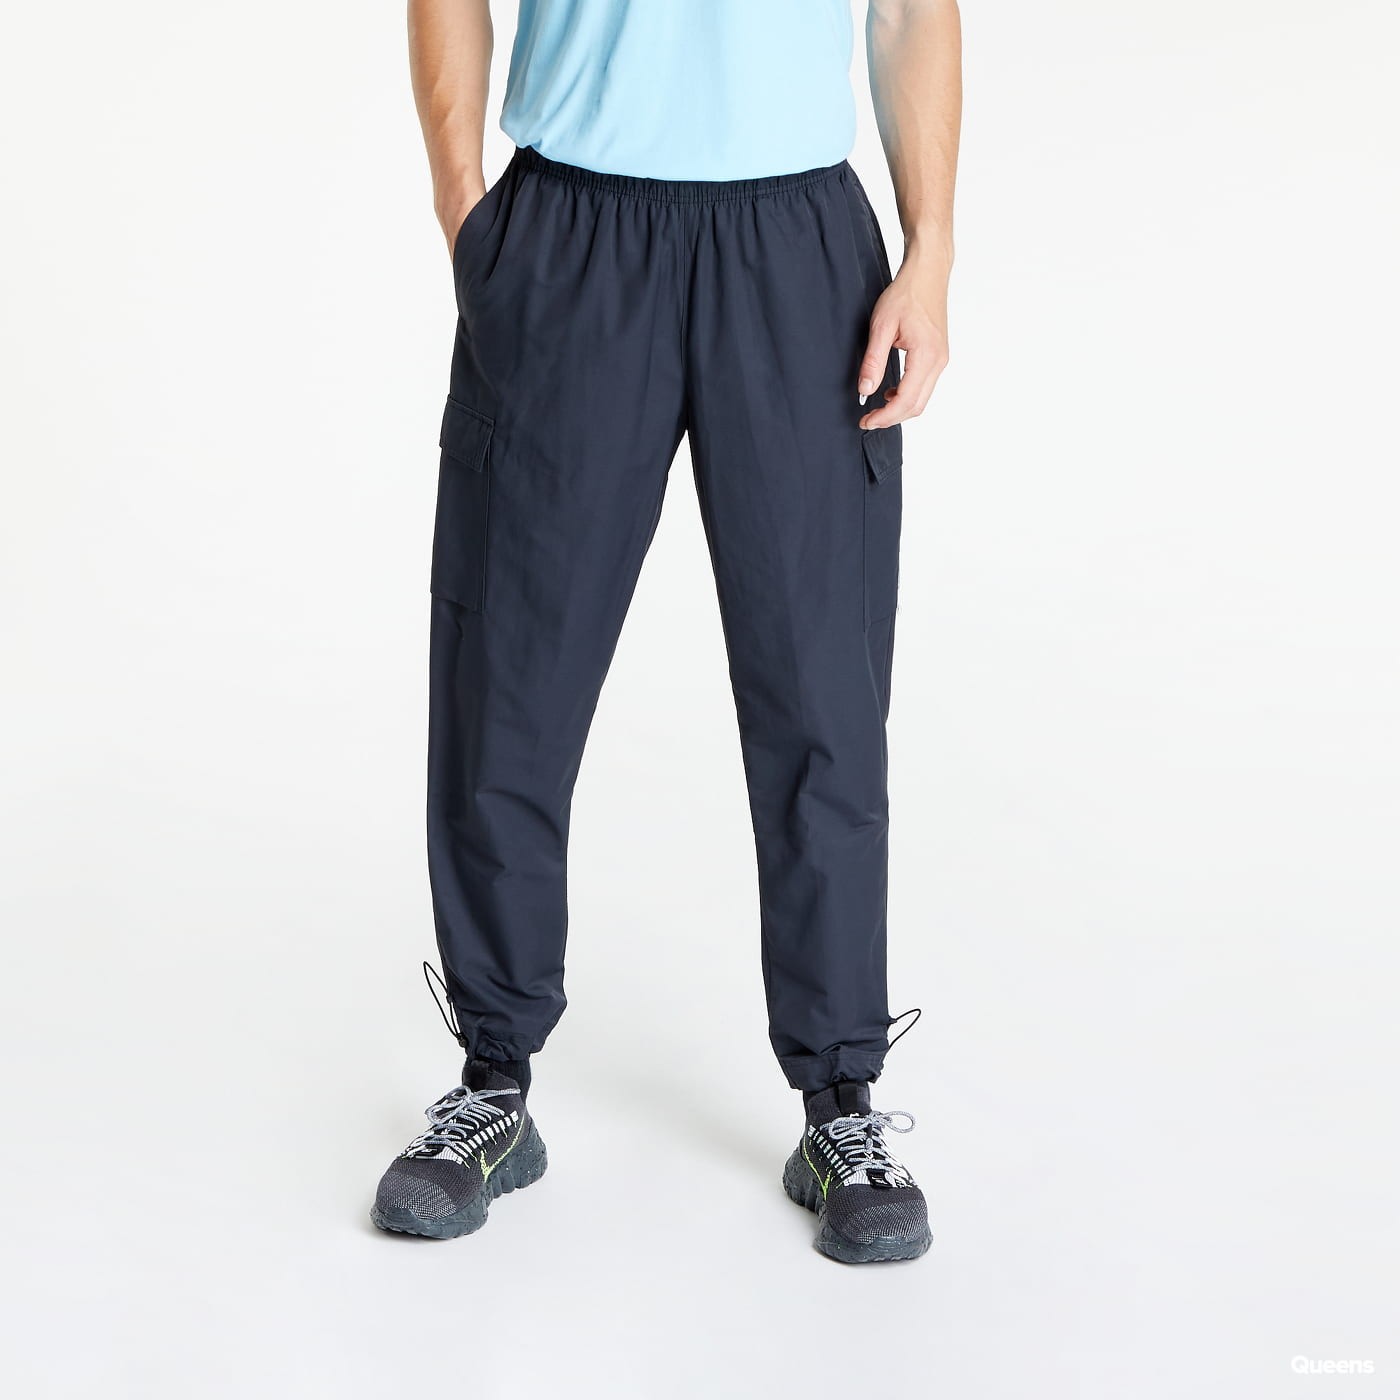 Sweatpants Nike Repeat Woven Trousers Fekete | DX2033-010, 0